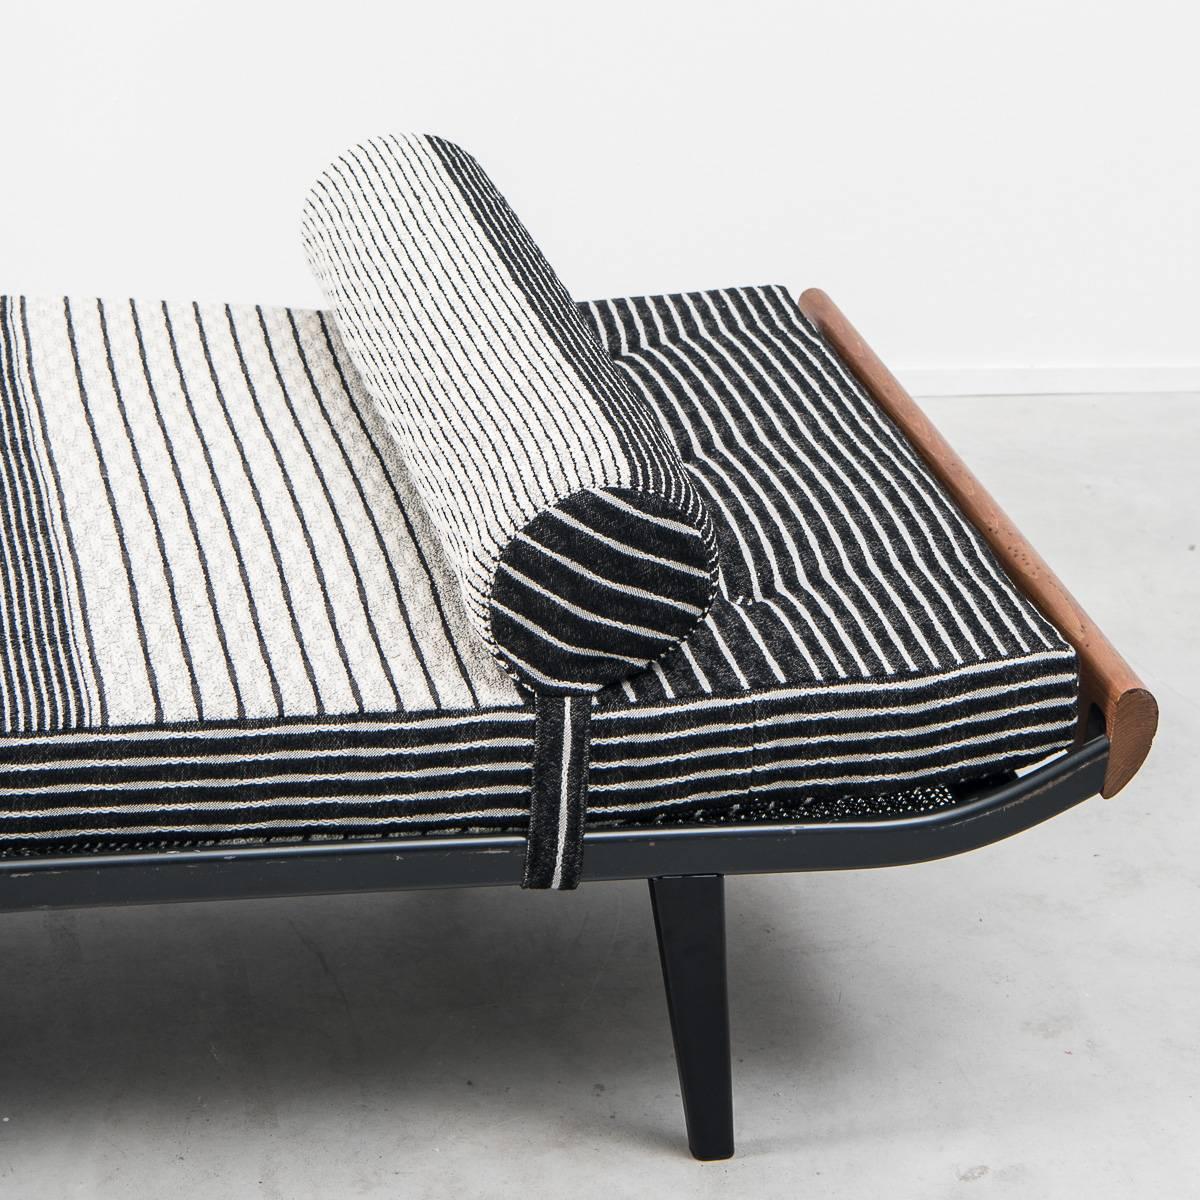 Mid-20th Century Cordemeijer Cleopatra Daybed for Auping, Netherlands, 1960s